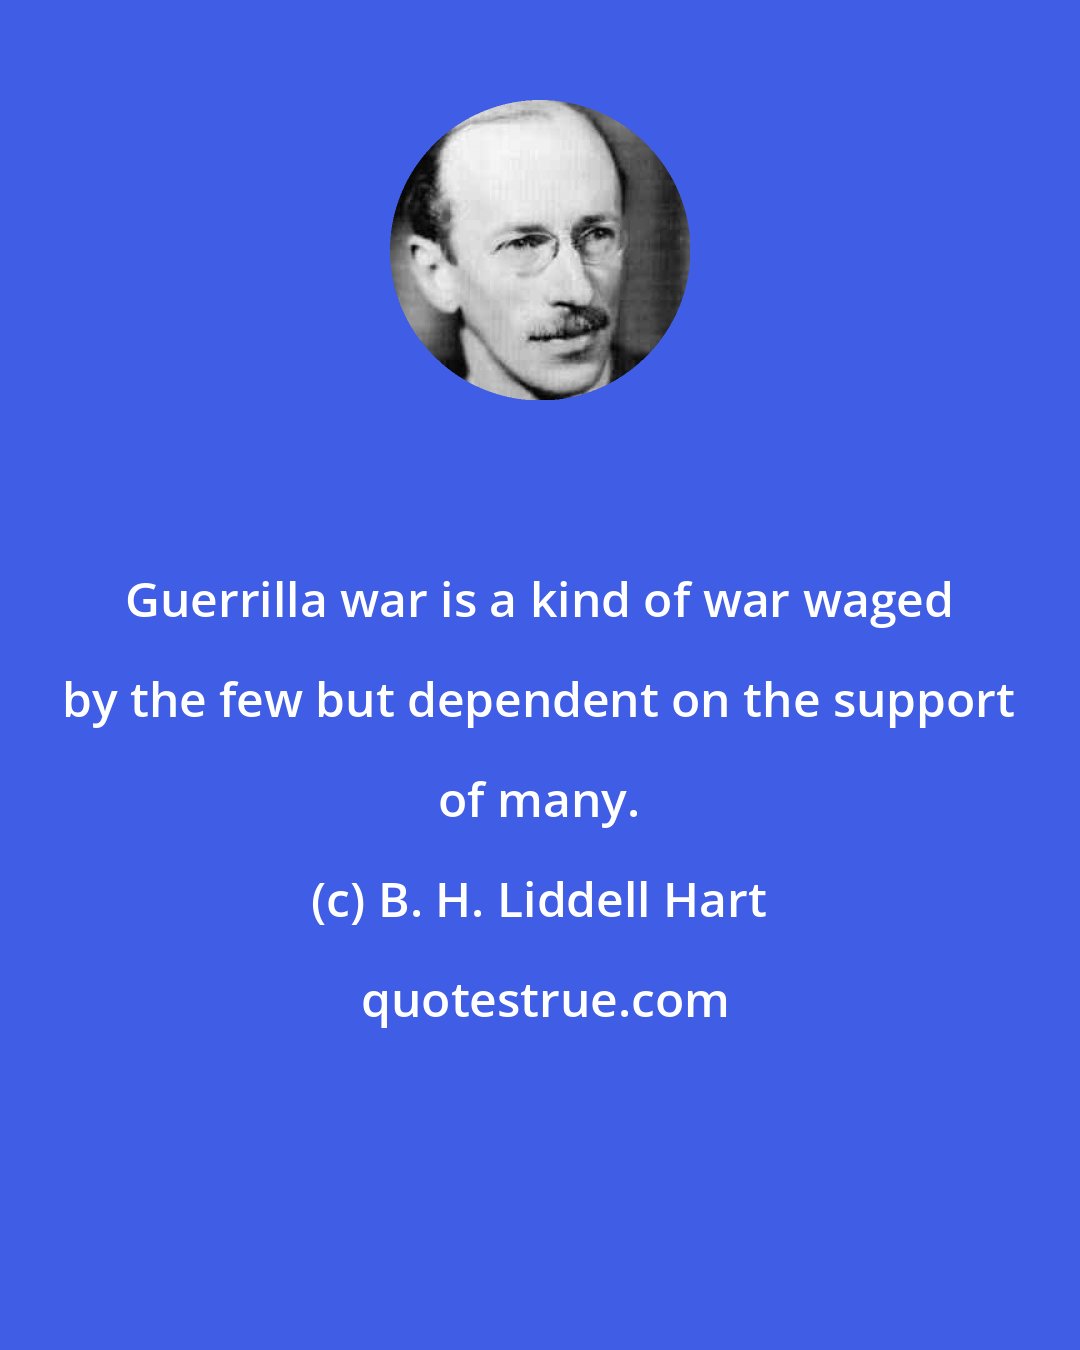 B. H. Liddell Hart: Guerrilla war is a kind of war waged by the few but dependent on the support of many.